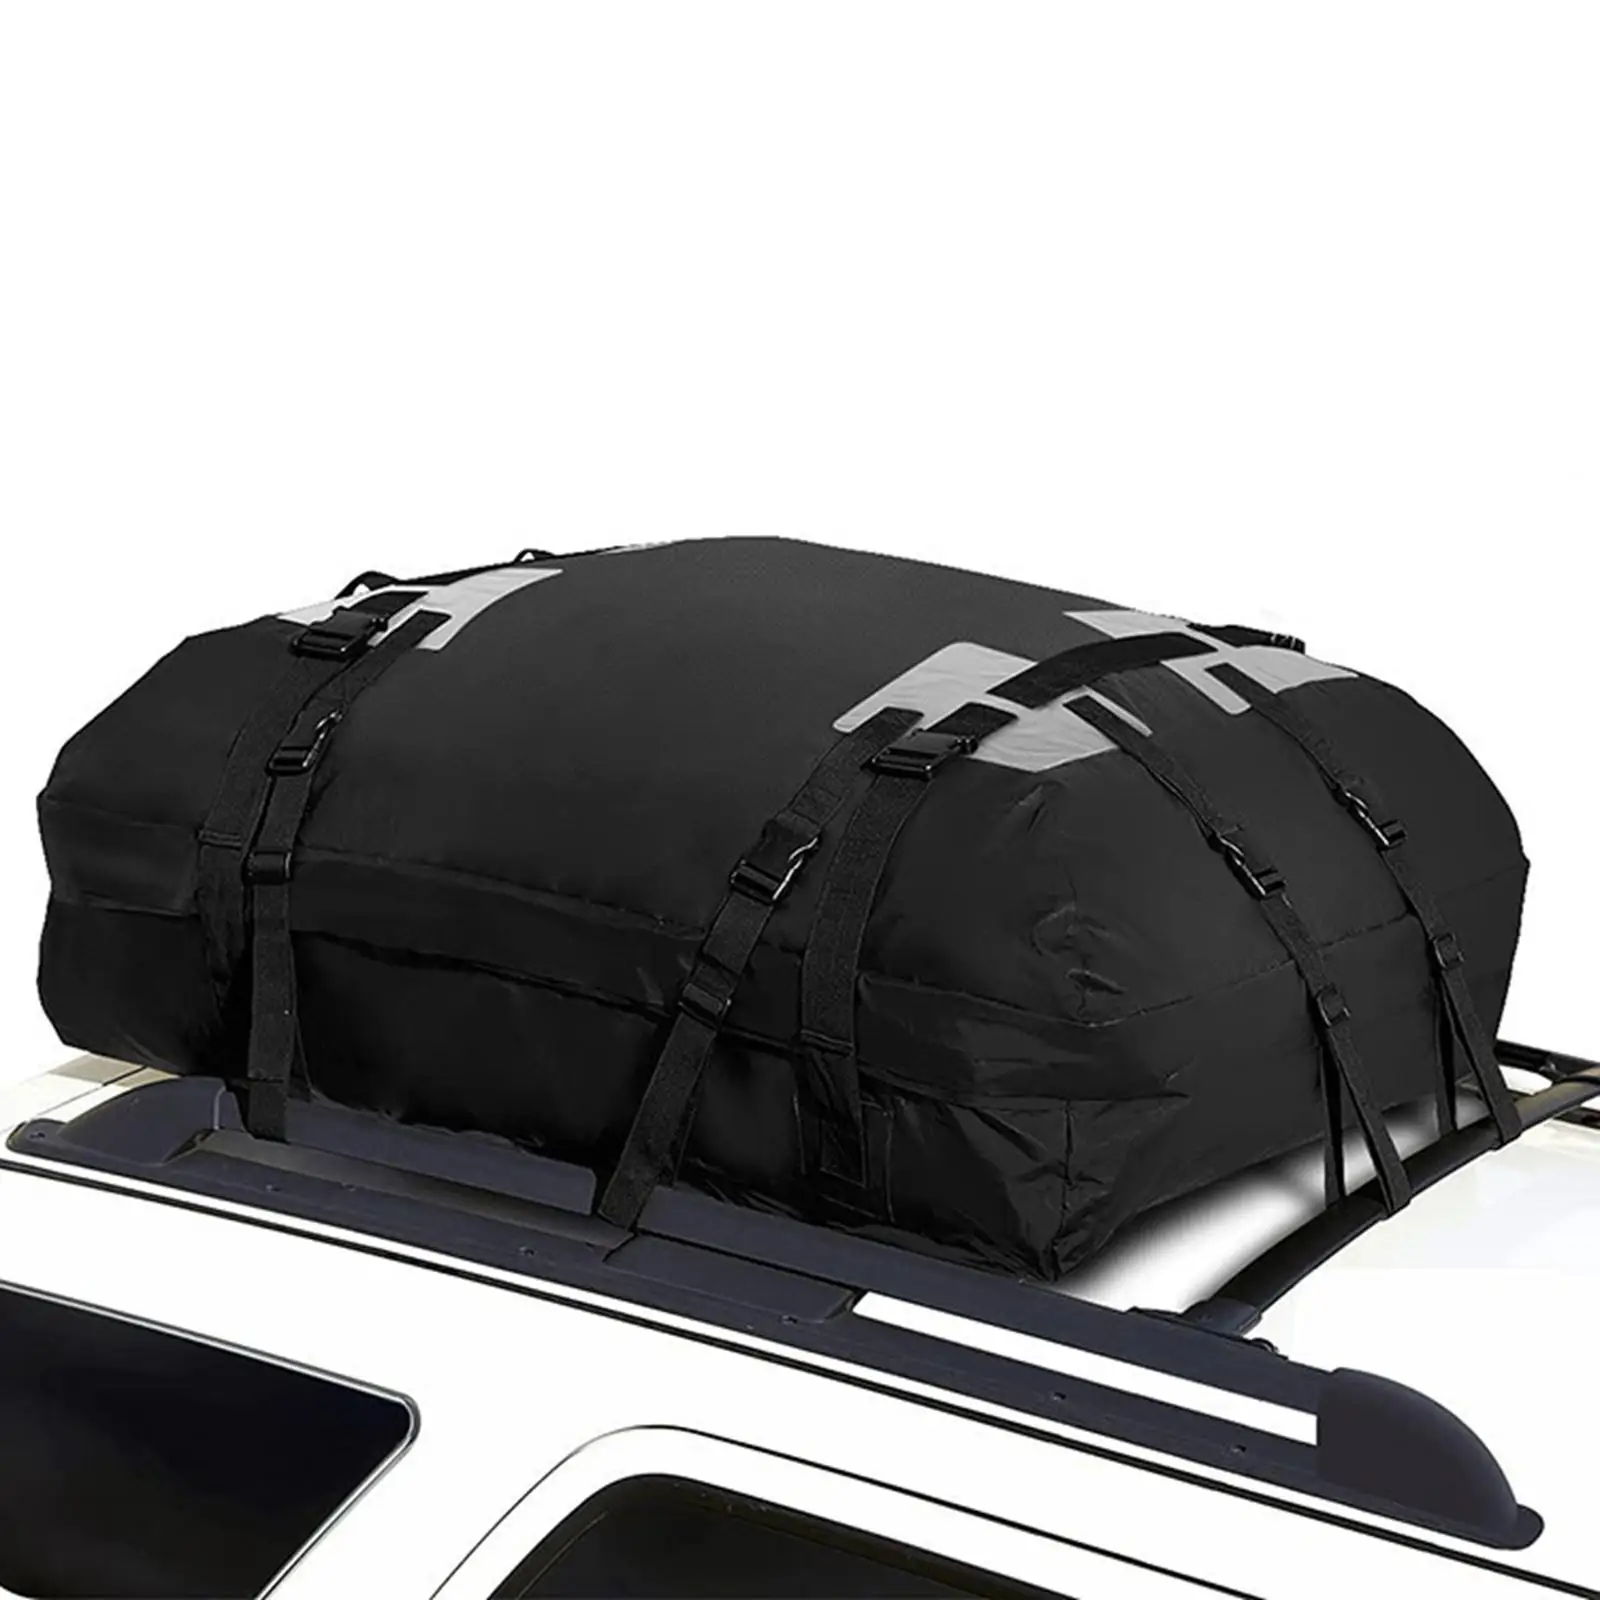 15 Cubic Feet Car Rooftop Bag Auto Roof Luggage Bag Waterproof Carrier Bag Waterproof Rooftop Cargo Carrier Bag for SUV Cars